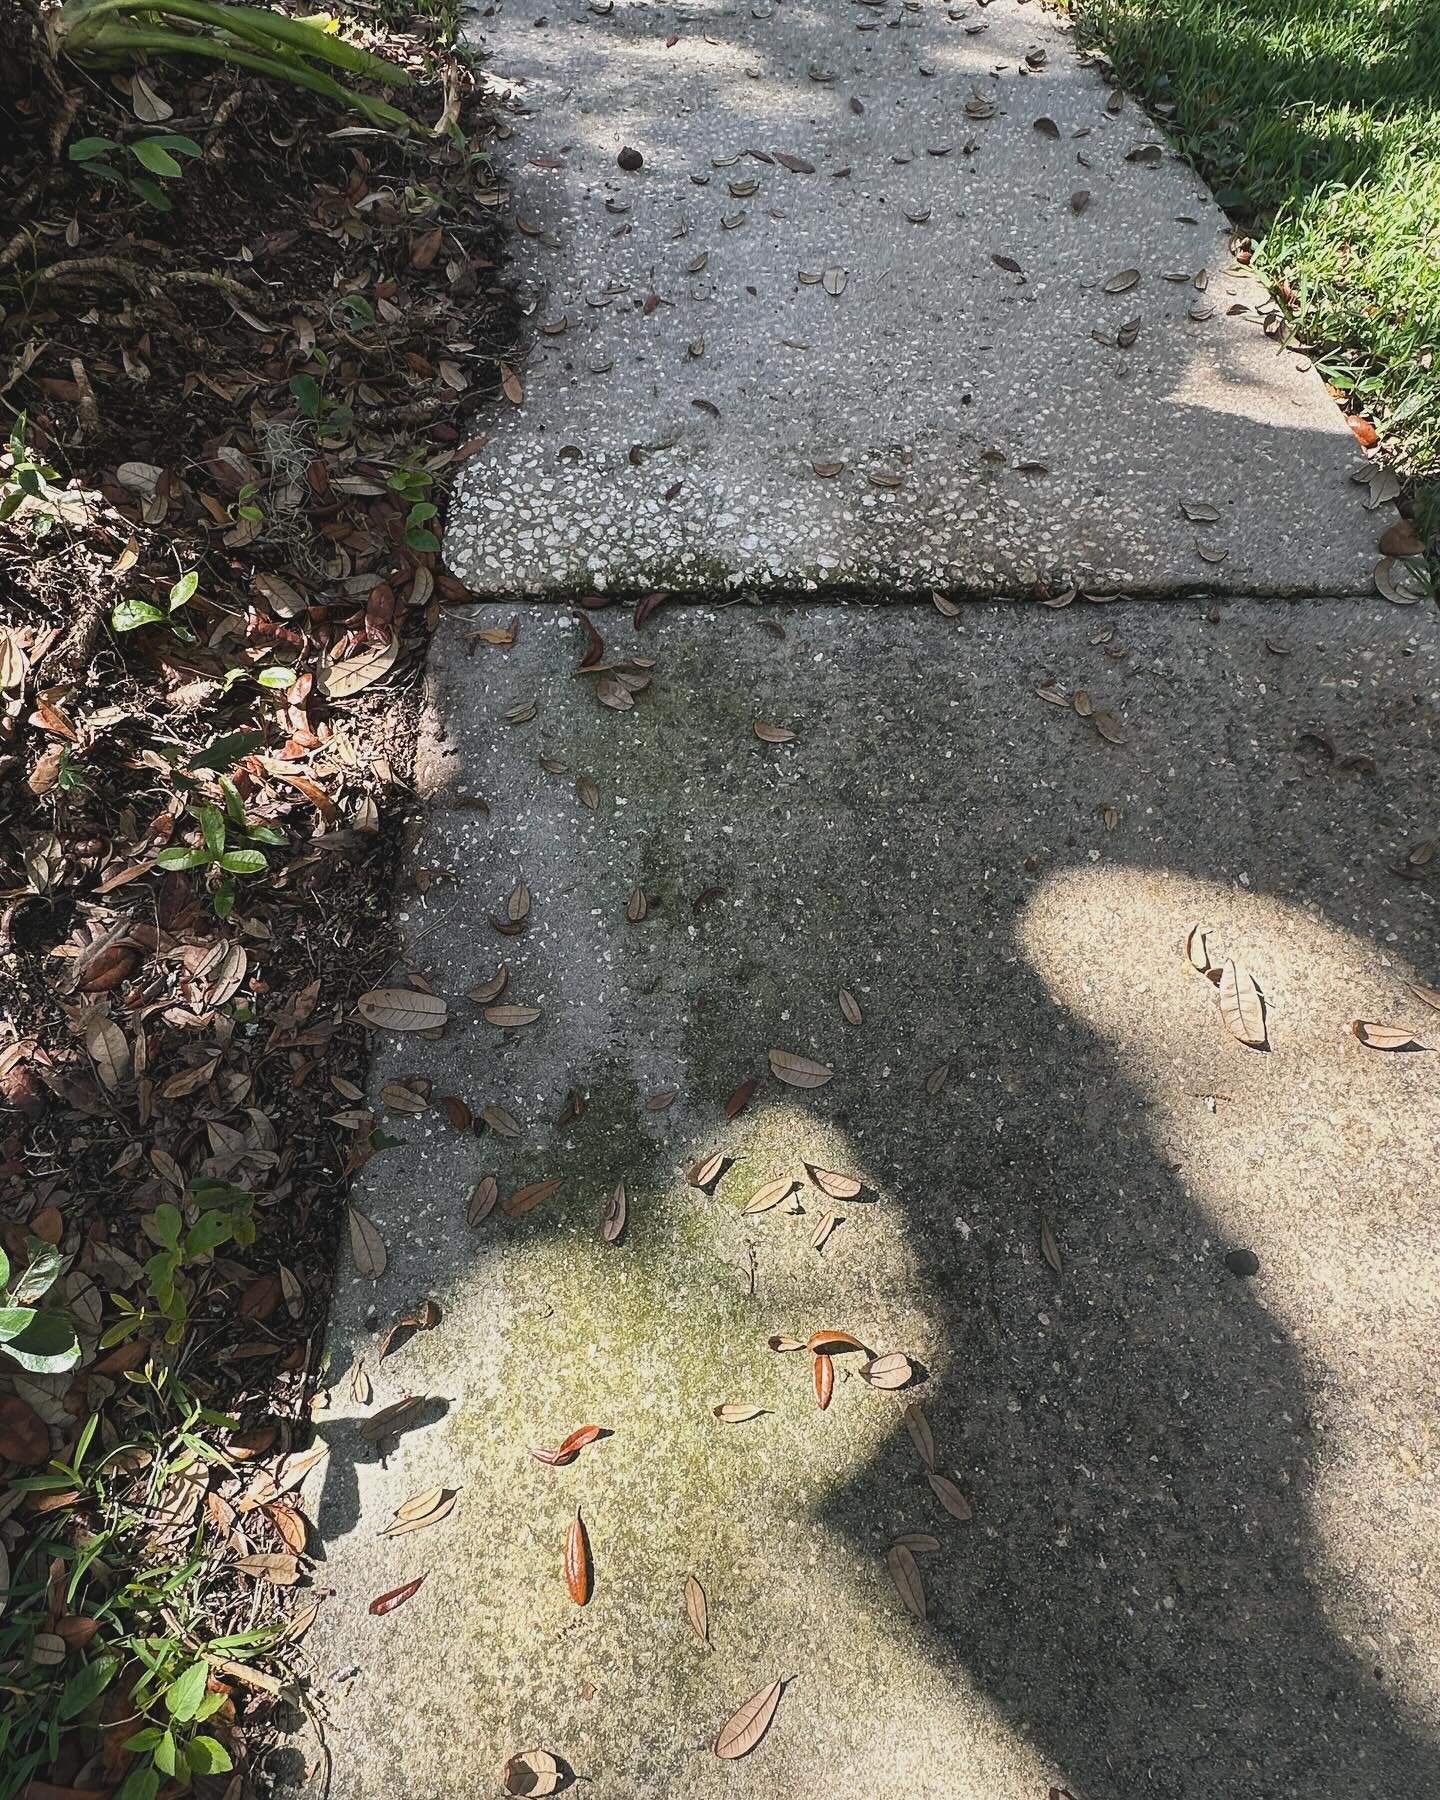 Here at Pinellas Soft Wash We take care of all exteriors from this Florida pollen covering your roof and stuffing up your nose to the algae growing from our famous Florida weather!  Make sure you come by our web page @ www.pinellassoftwash.org or www